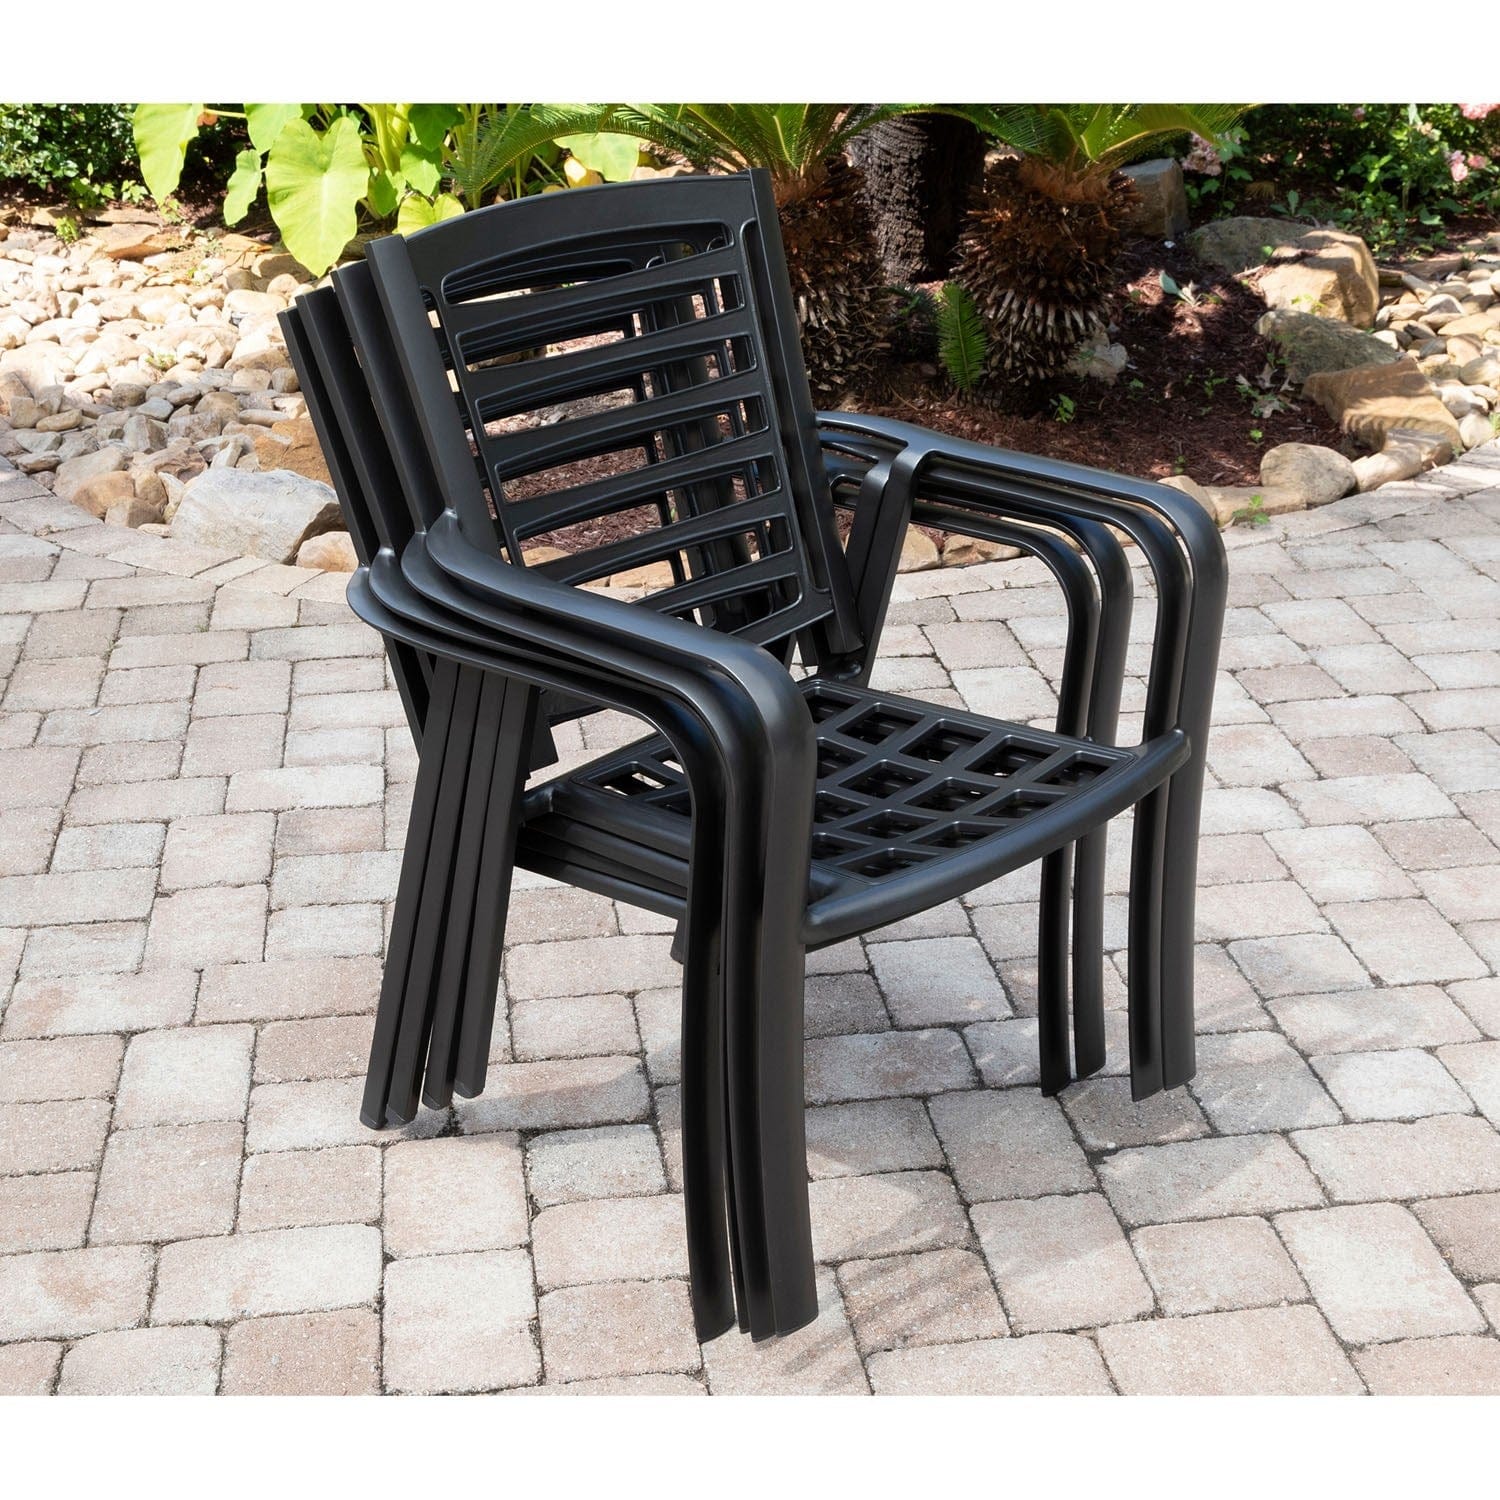 Hanover Bistro Set Hanover - Pemberton 3pc: 2 Alum Dining Chairs and 1 30" Sq Glass Table